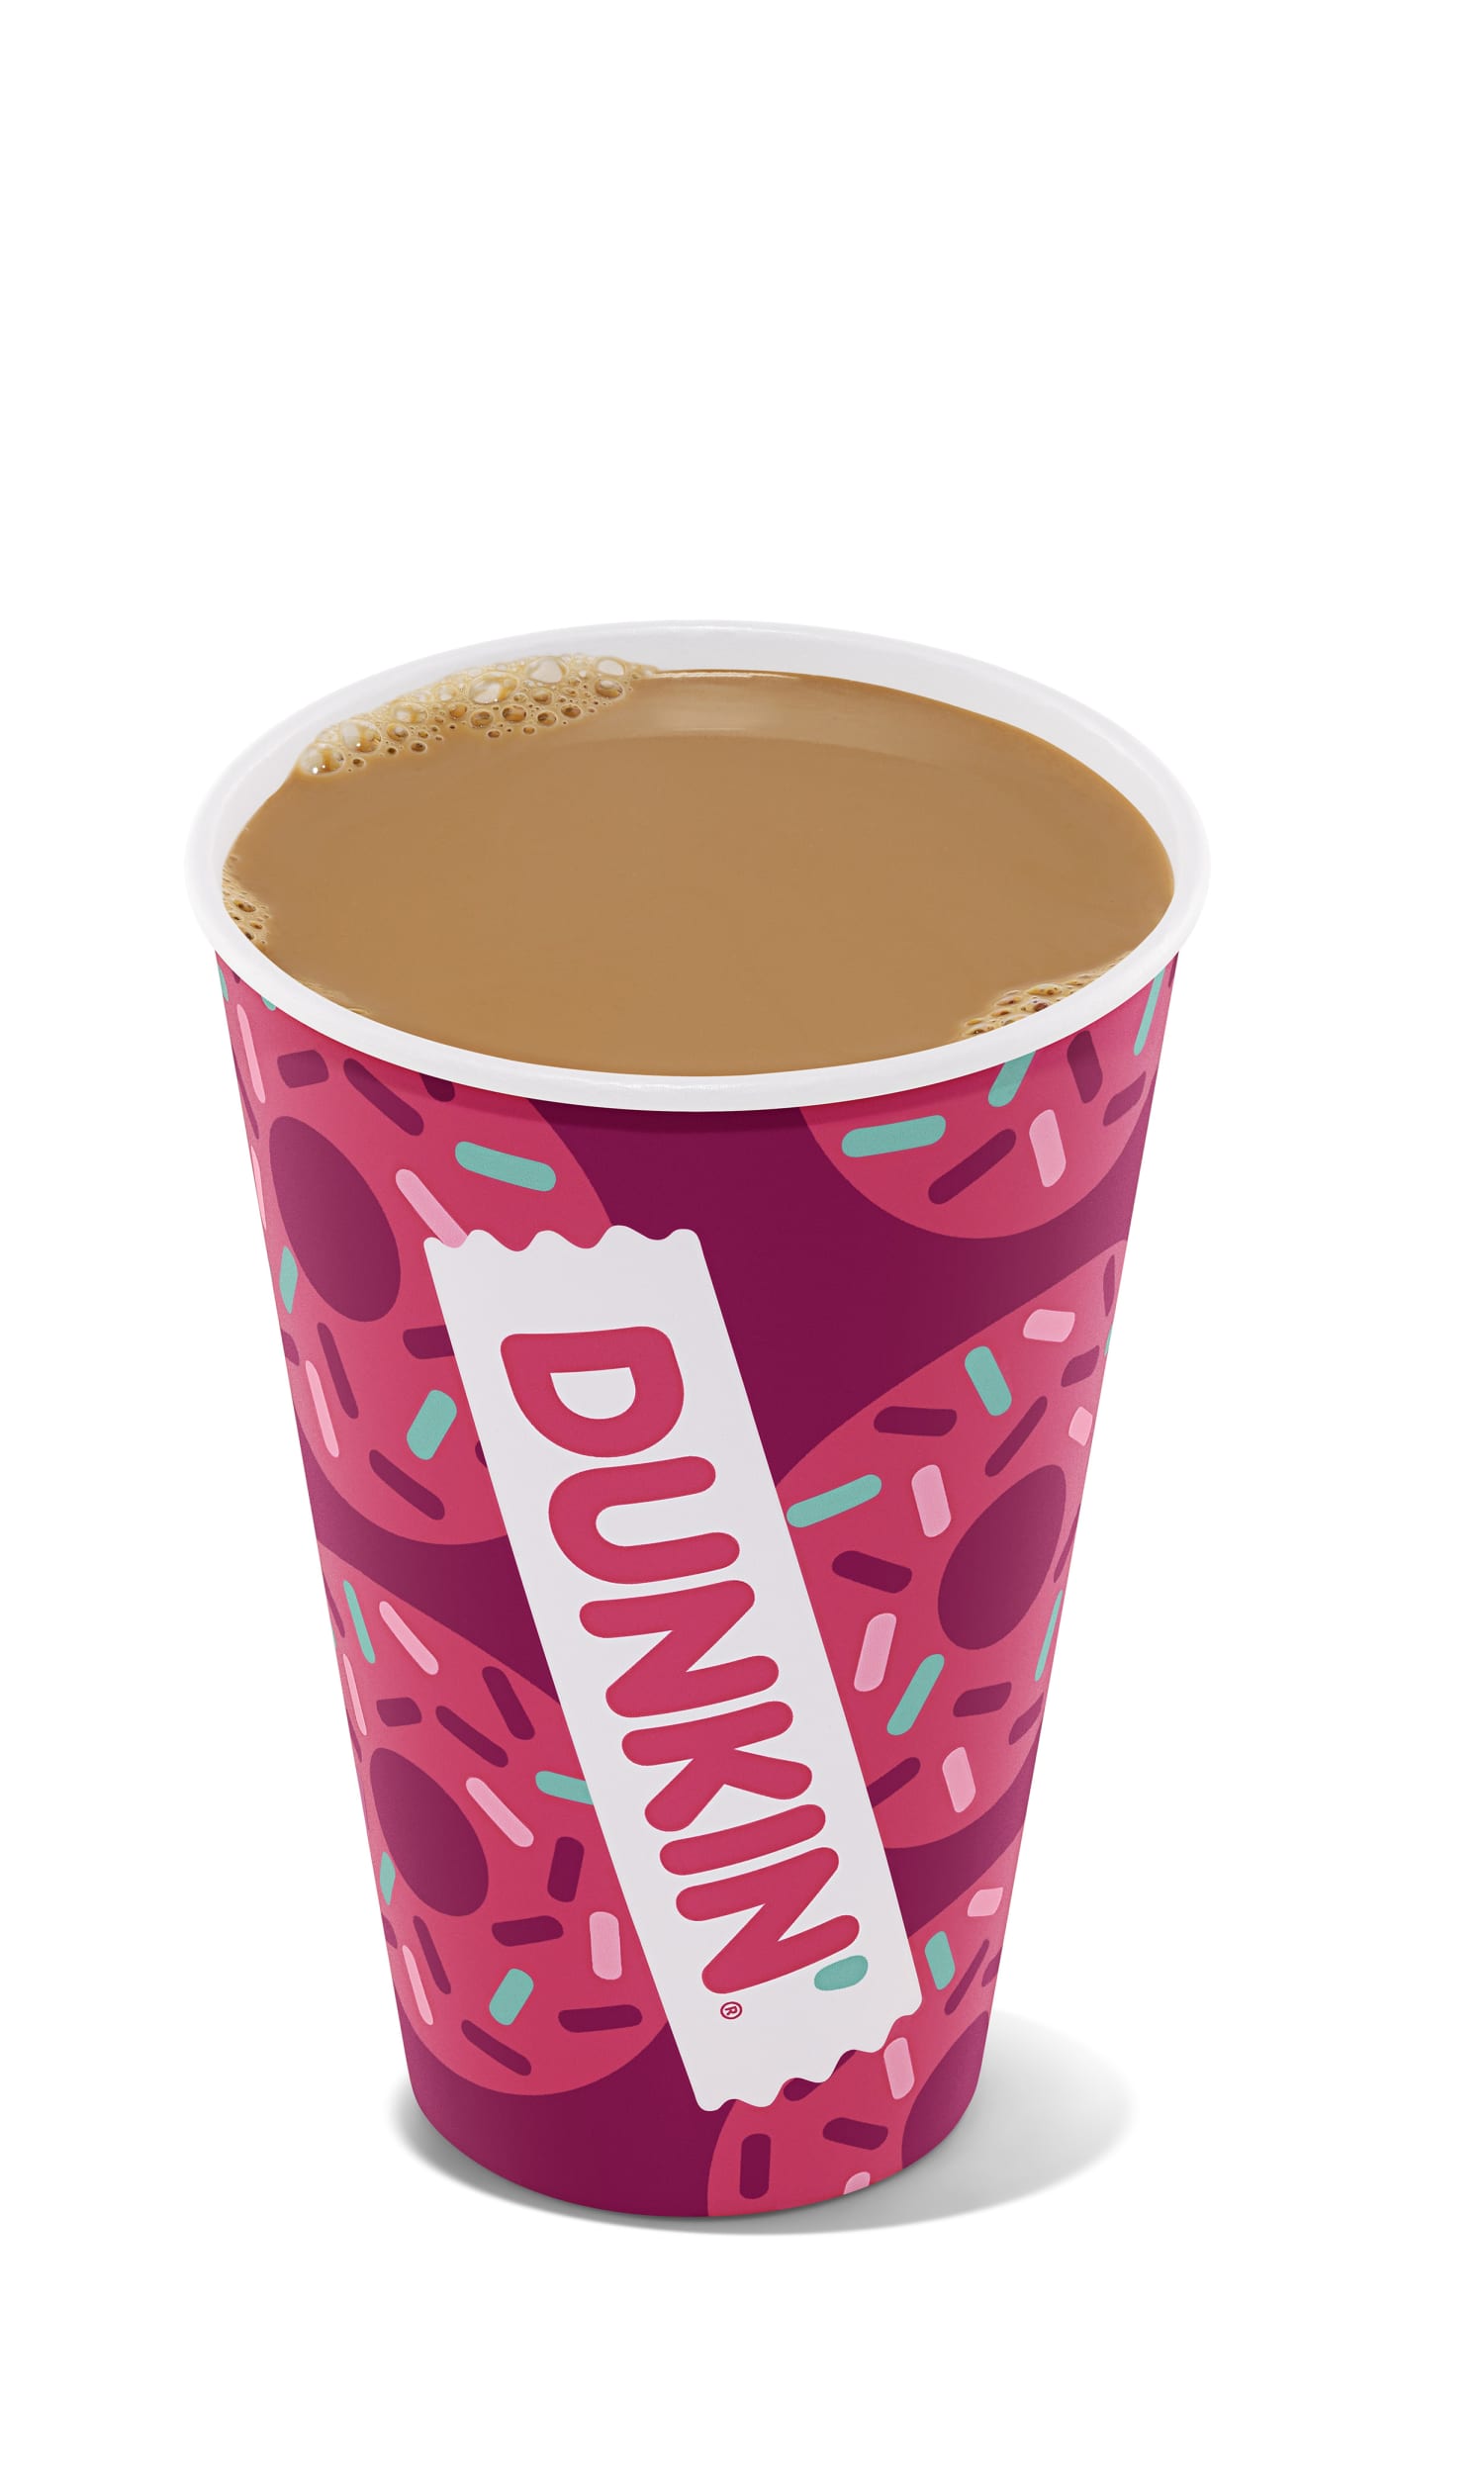 Dunkin' Holiday Cup Design Released, Dunkin